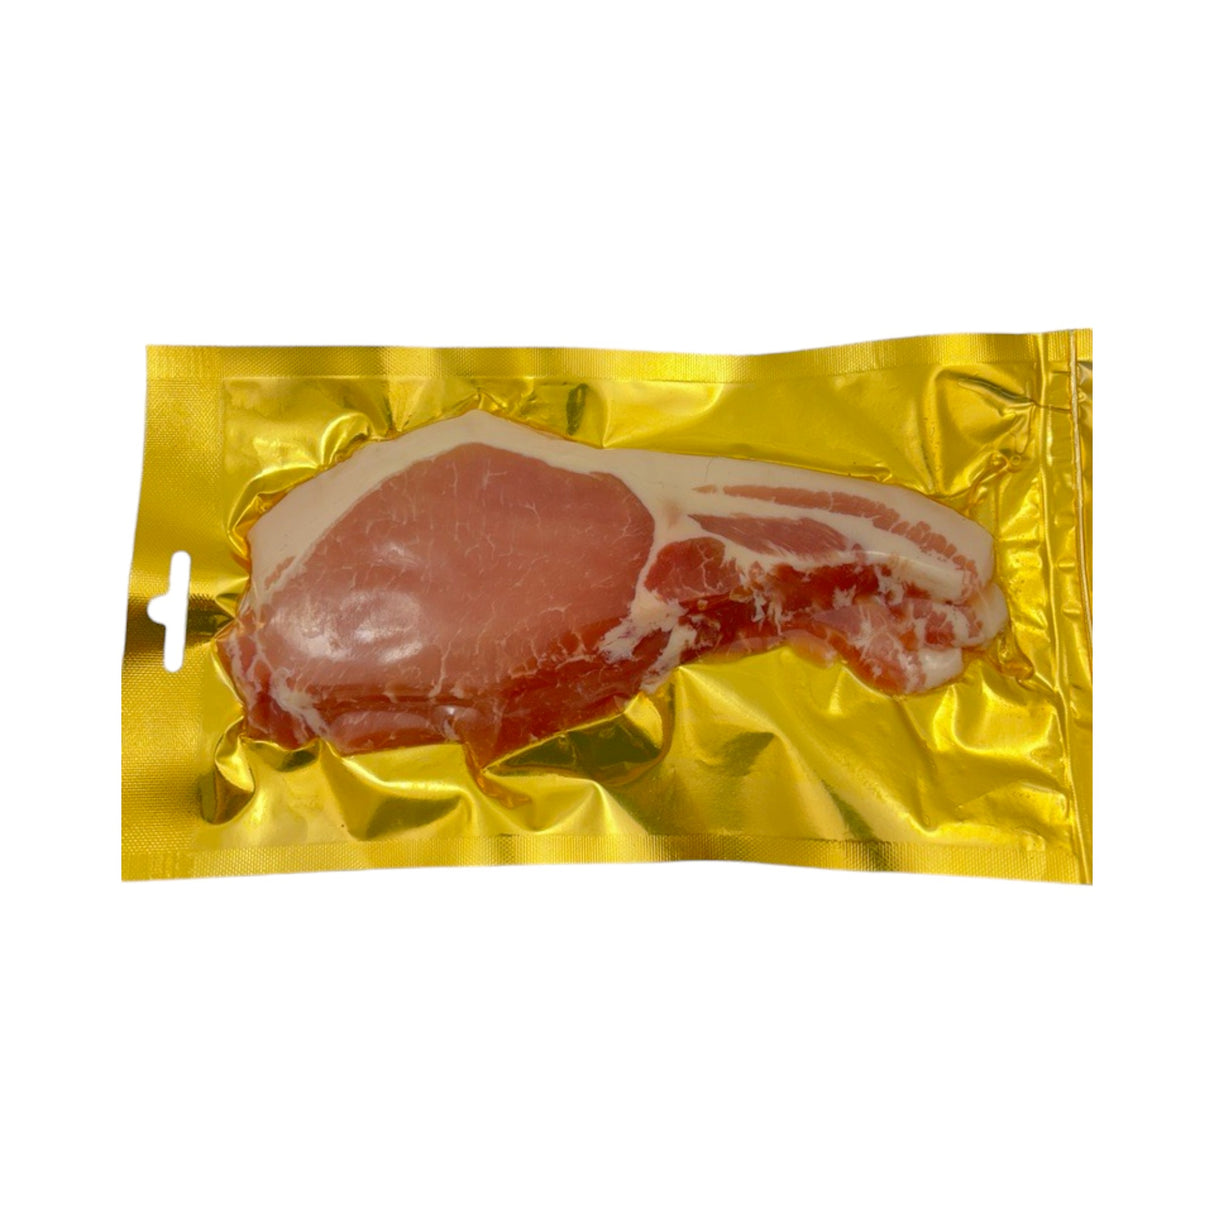 Kingleys - Traditional Dry Cured Short Back Bacon 200g